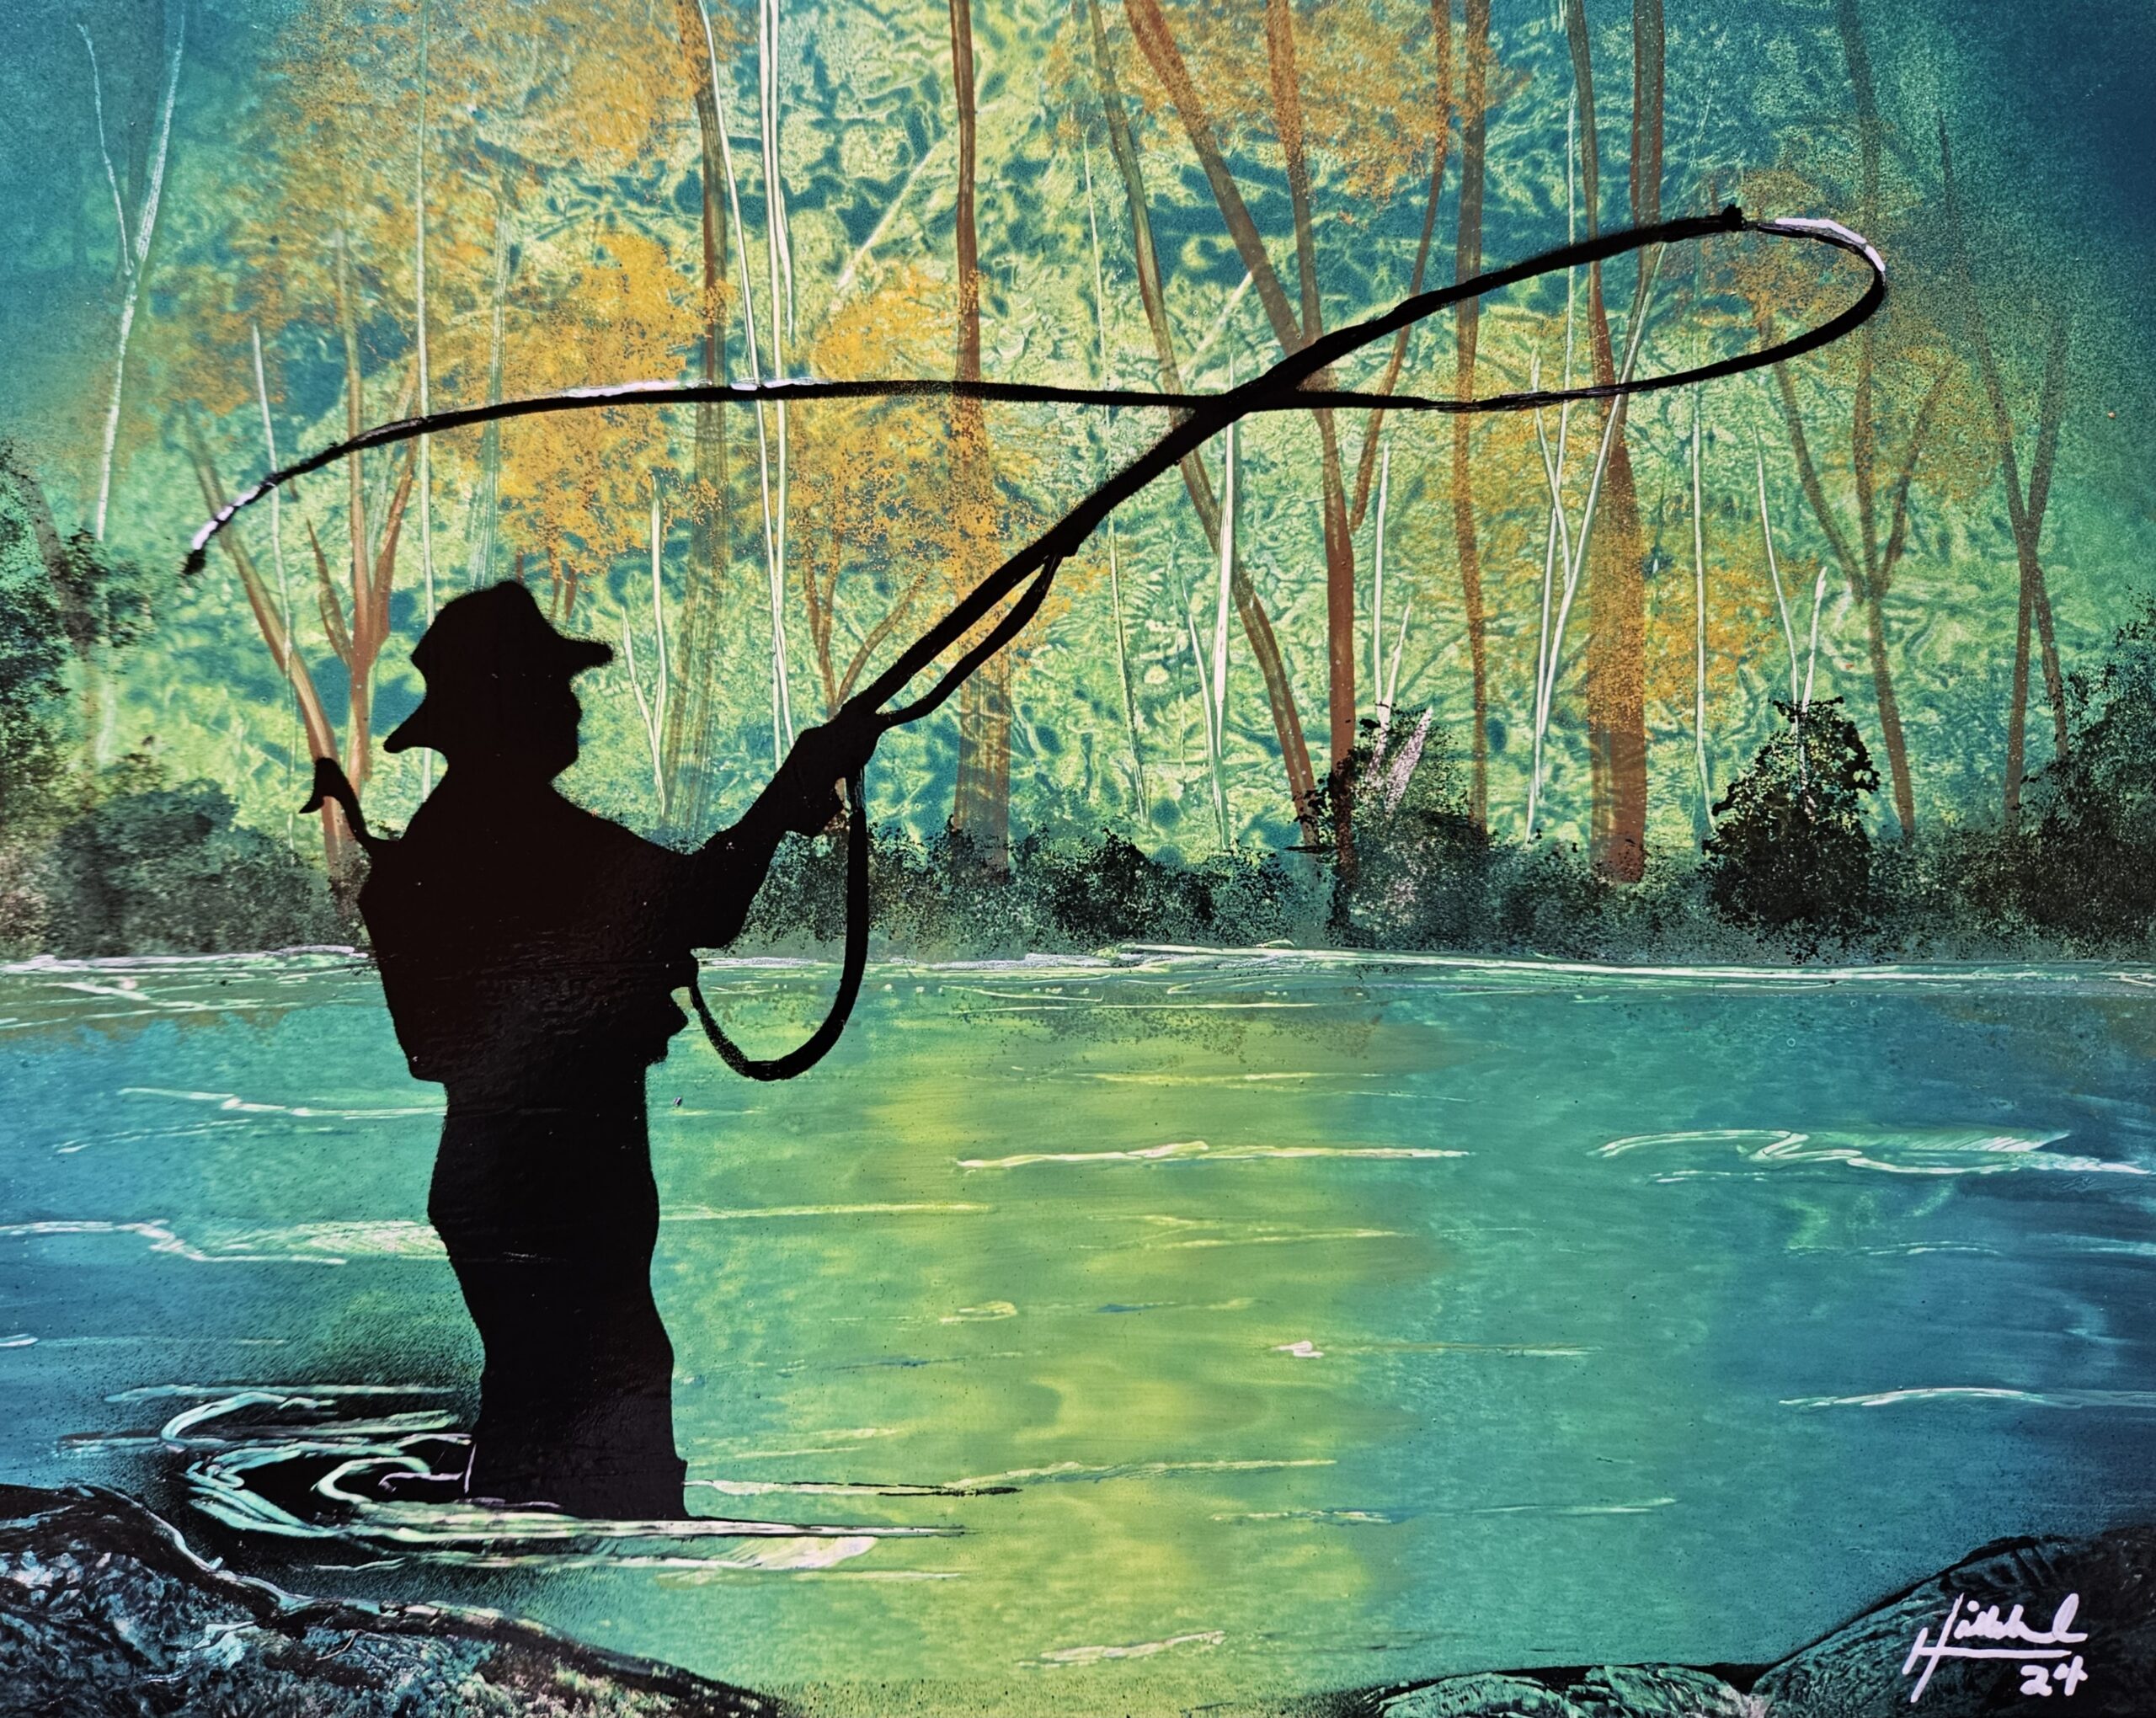 Fly Fishing - spray painting